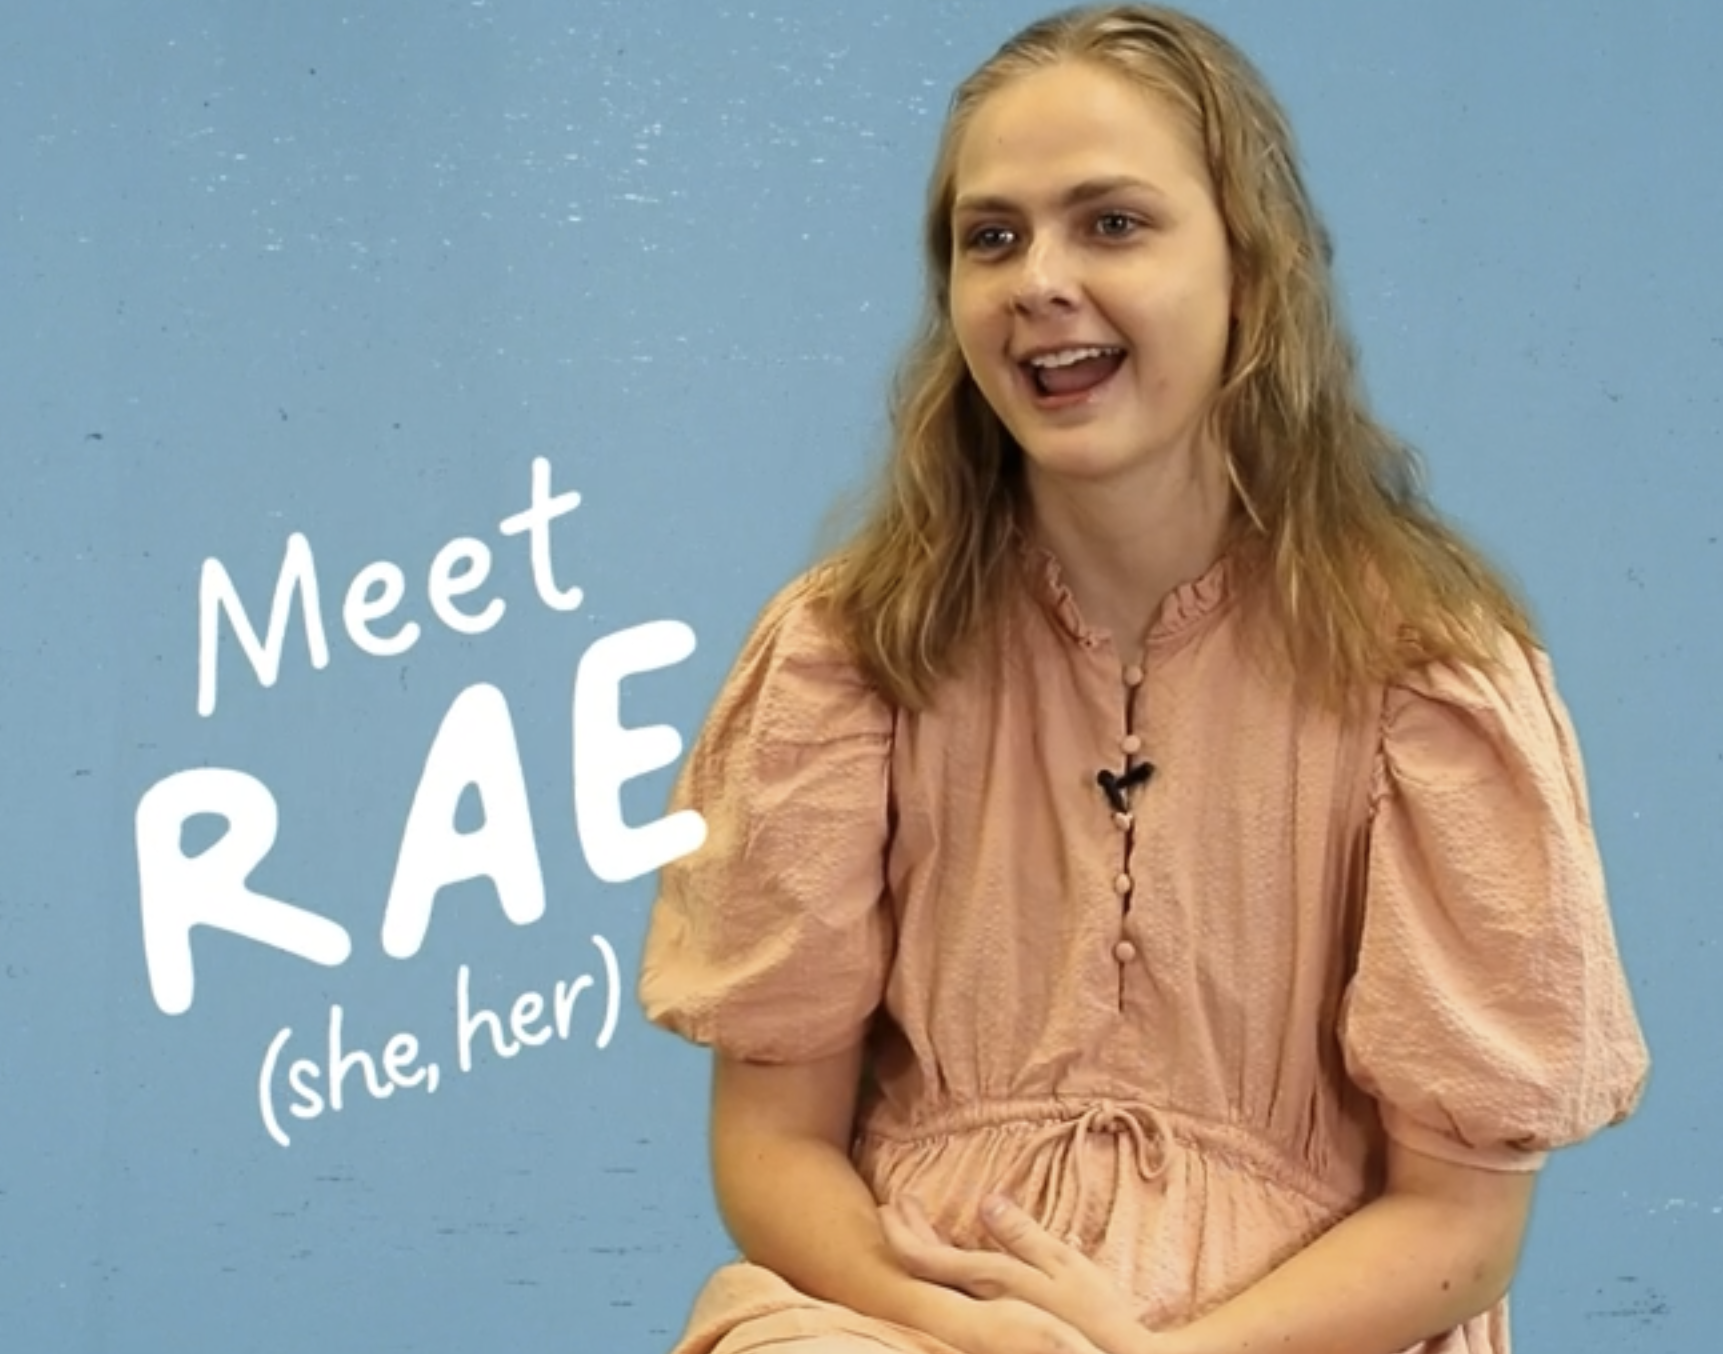 Rae (she/her) is majoring in child, youth and family studies.